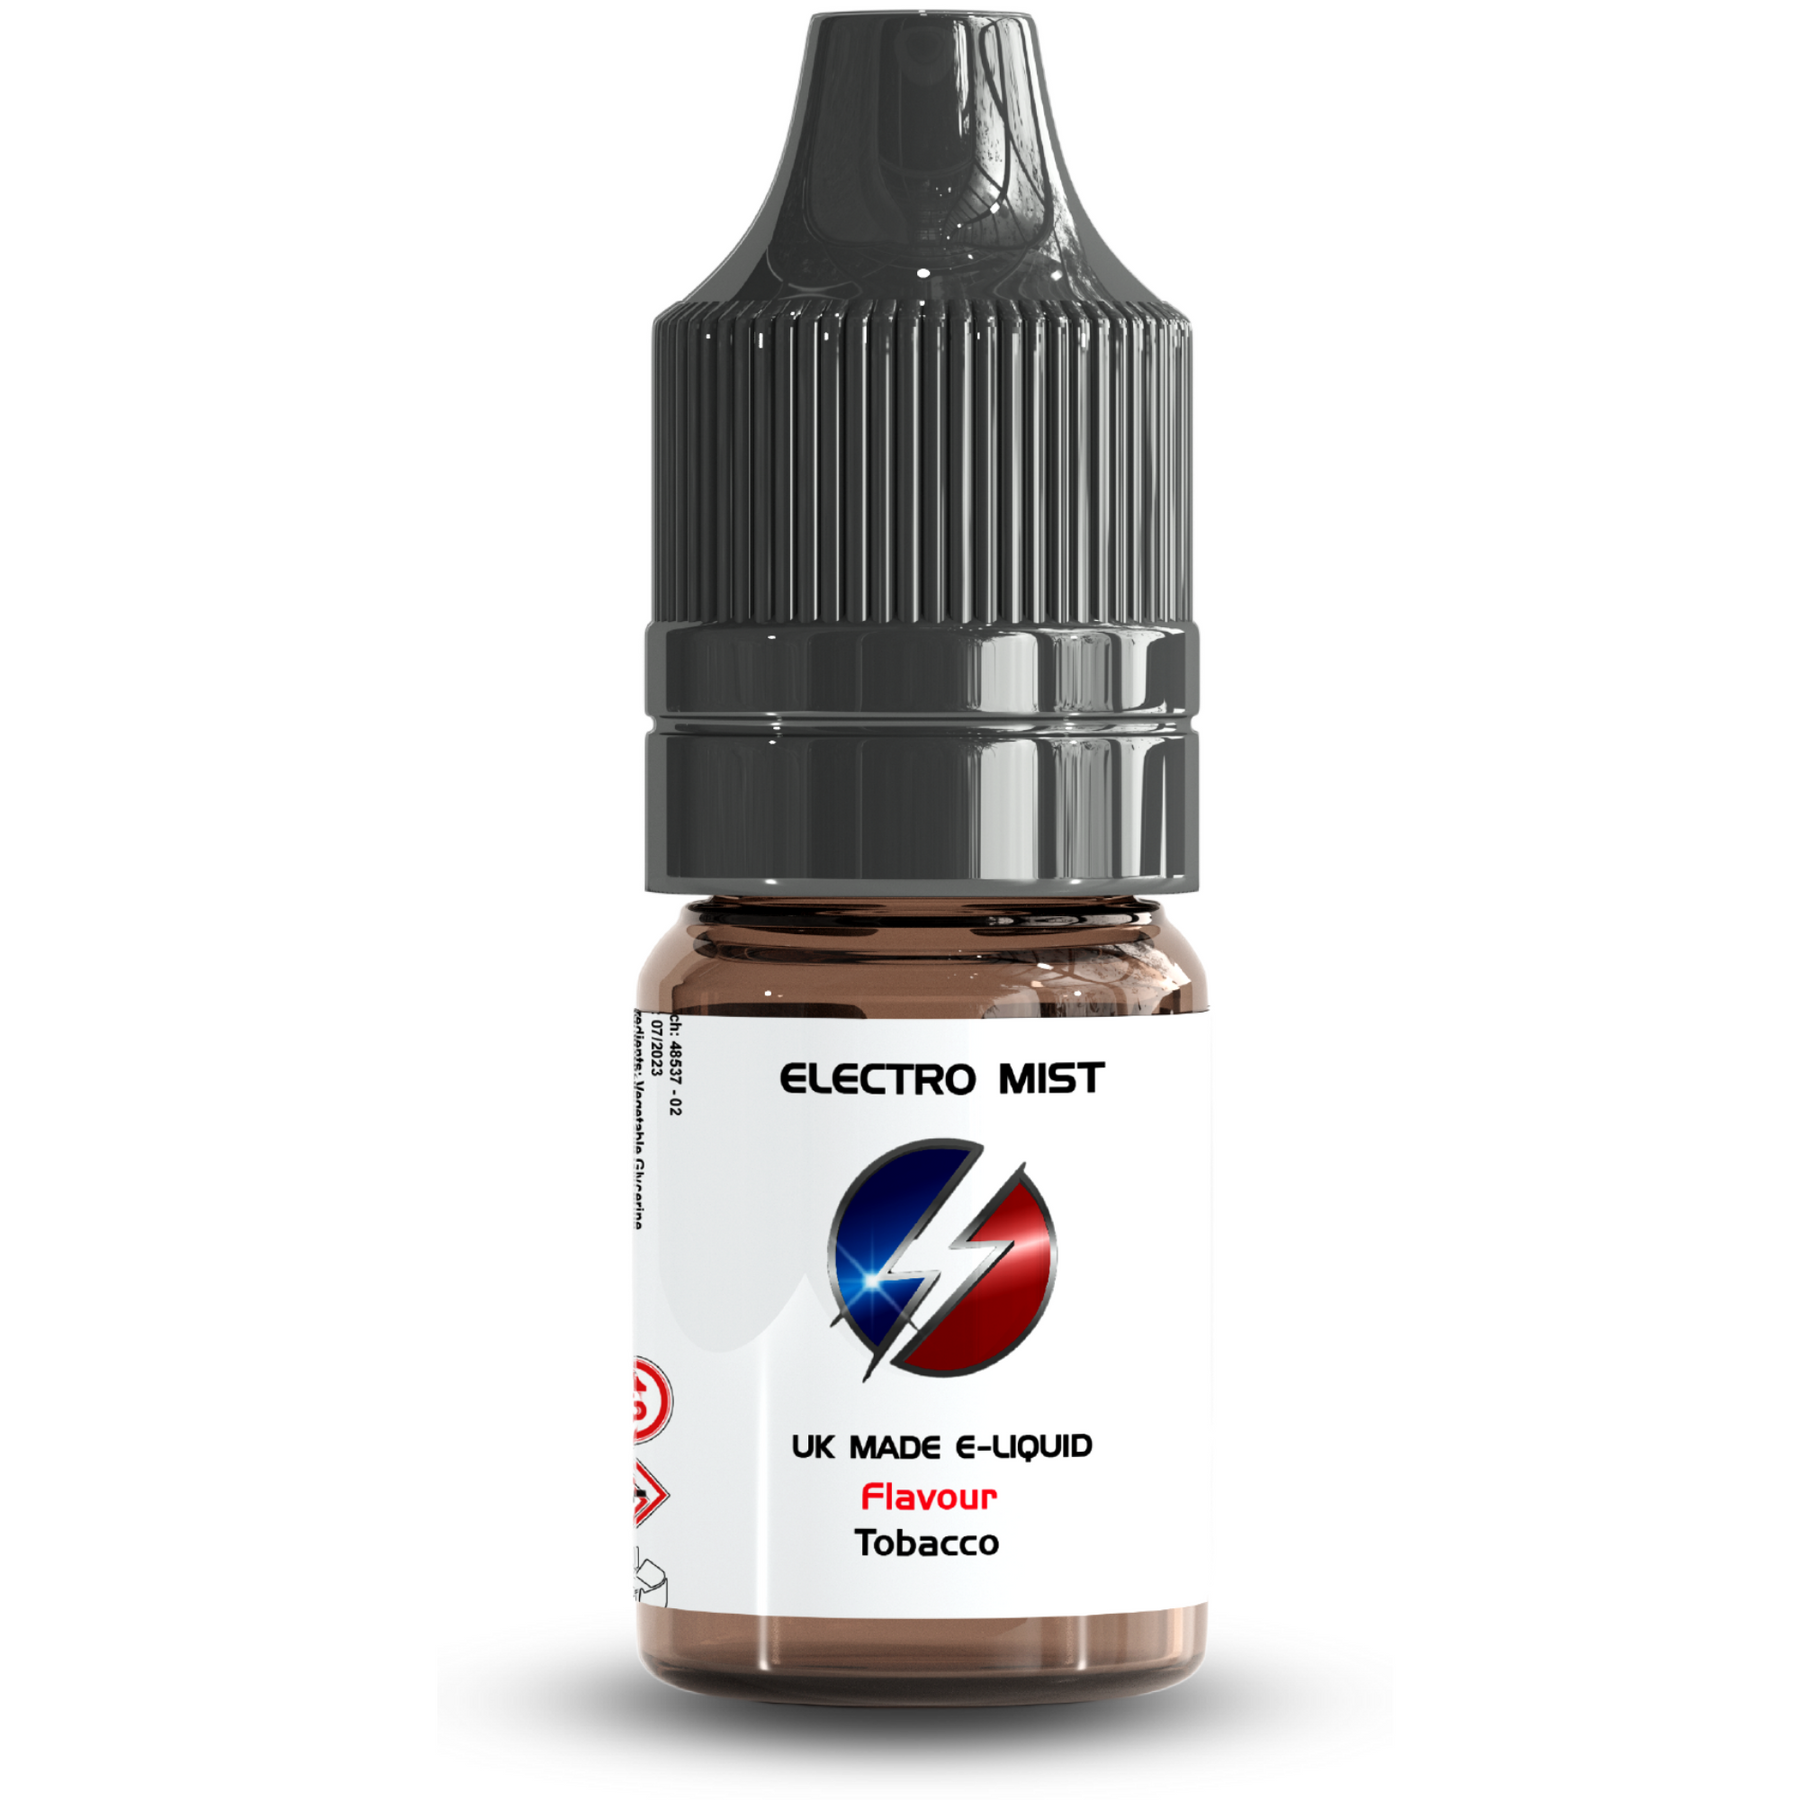 Electromist, the e-liquid brand you can trust. Get your taste buds ready for a flavour sensation, Tobacco. Nicotine Content: 3mg/6mg/12mg. Products may contain nicotine. For over 18s Only ejuice, vape pen, eliquid, e cigarette, 10ml, vaping, cloud, PG, VG, 60/40, vape liquid, Flavour